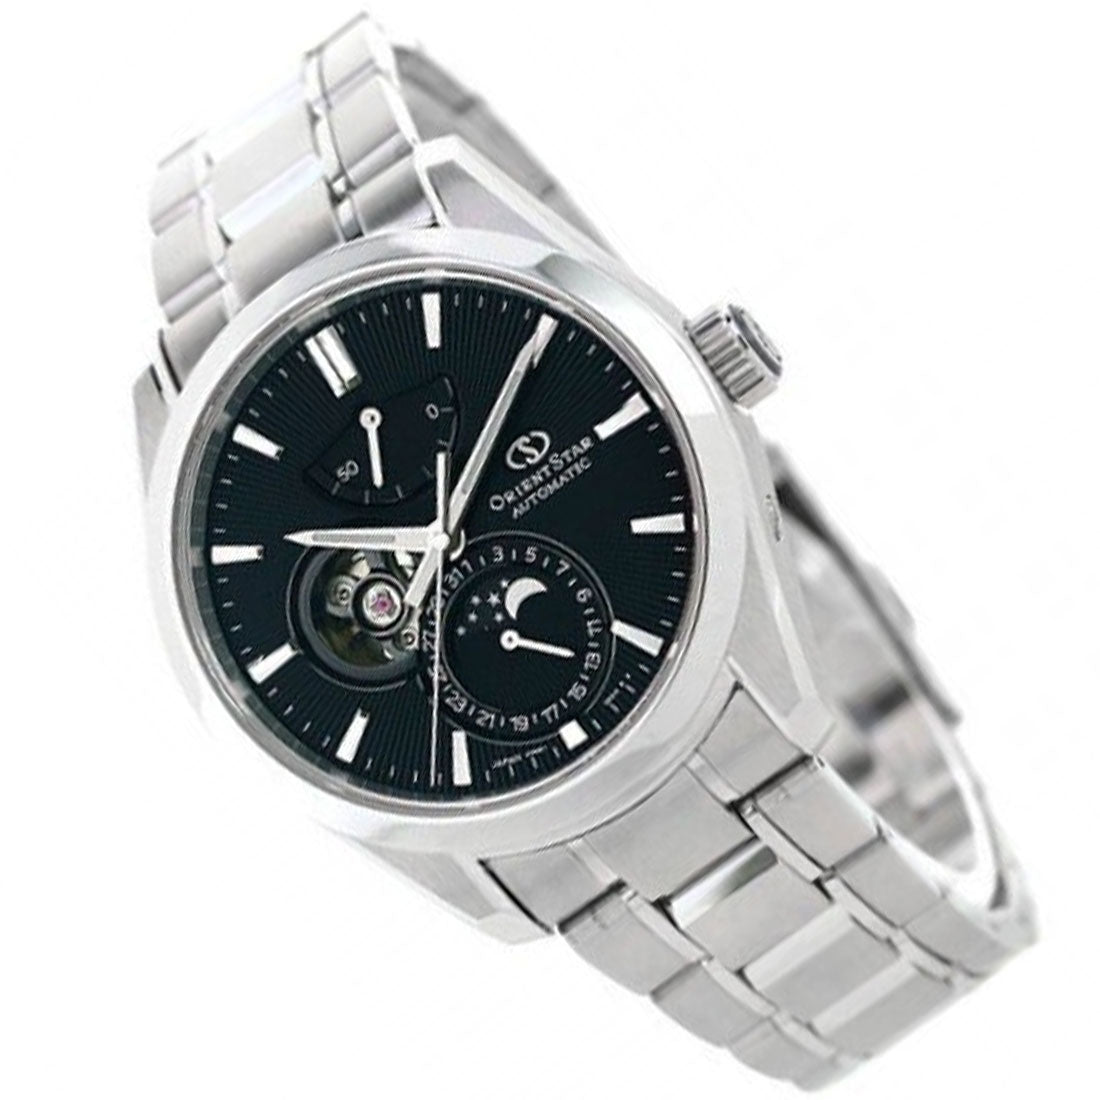 Orient Star Moon Phase Black Dial Classic Watch RE-AY0001B RE-AY0001B00B -Orient